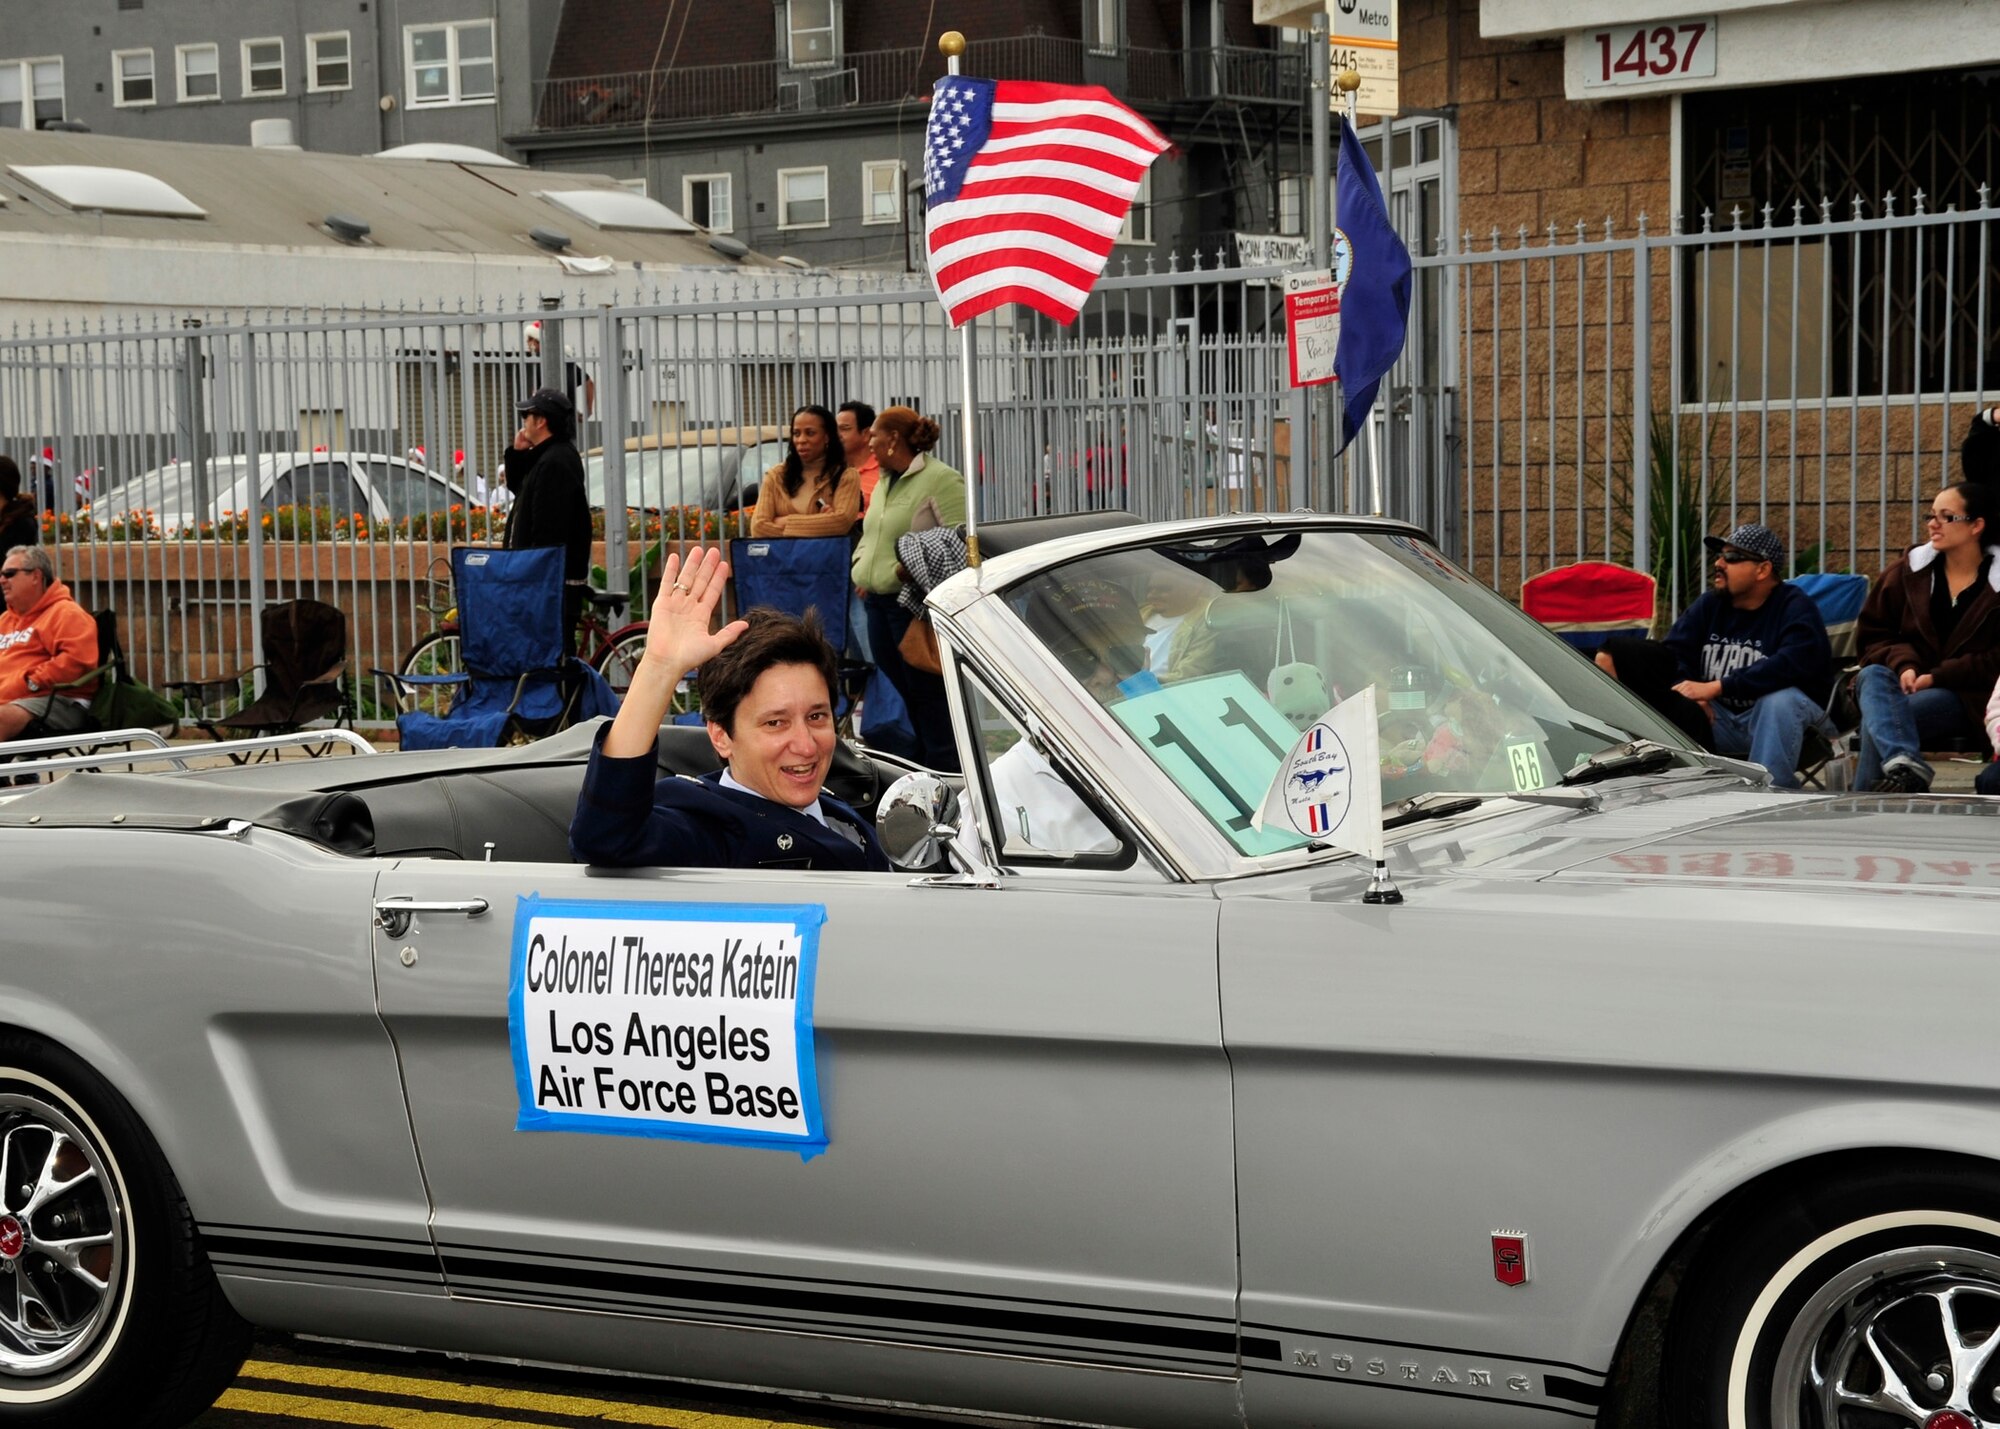 Col. Theresa Katein, 61st Mission Support commander, rode in a vintage Mustang in the San Pedro Holiday Parade, Dec. 7.  An Honor Guard and a cheerleading squad also represented the base in the annual event, which included local dignitaries, marching bands and community groups. (Photo by Lou Hernadez)